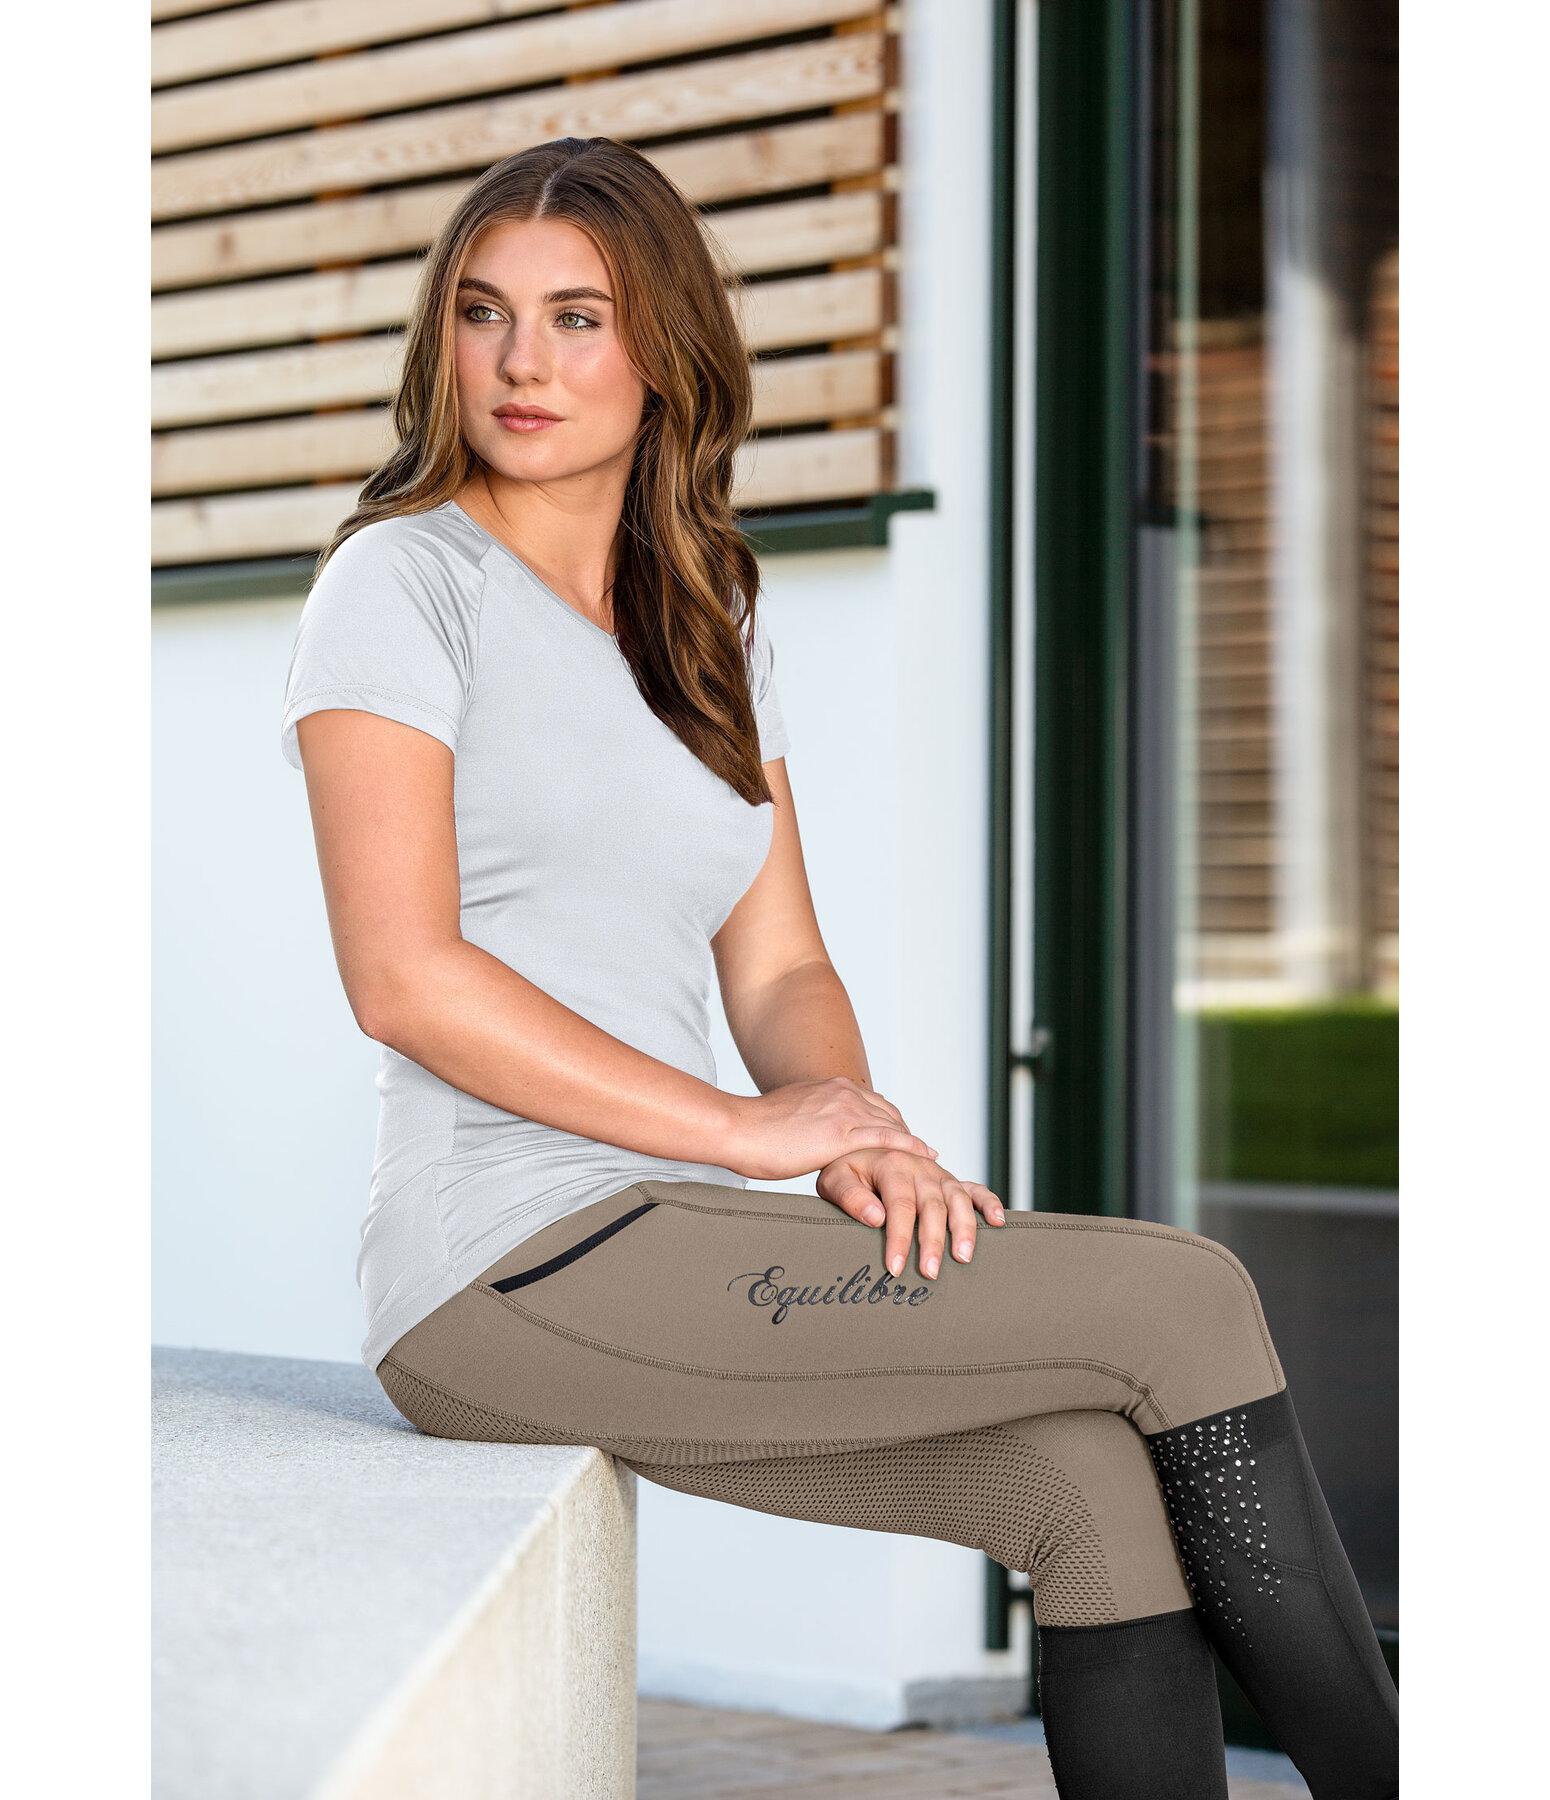 Grip Full-Seat Riding Tights Isabelle